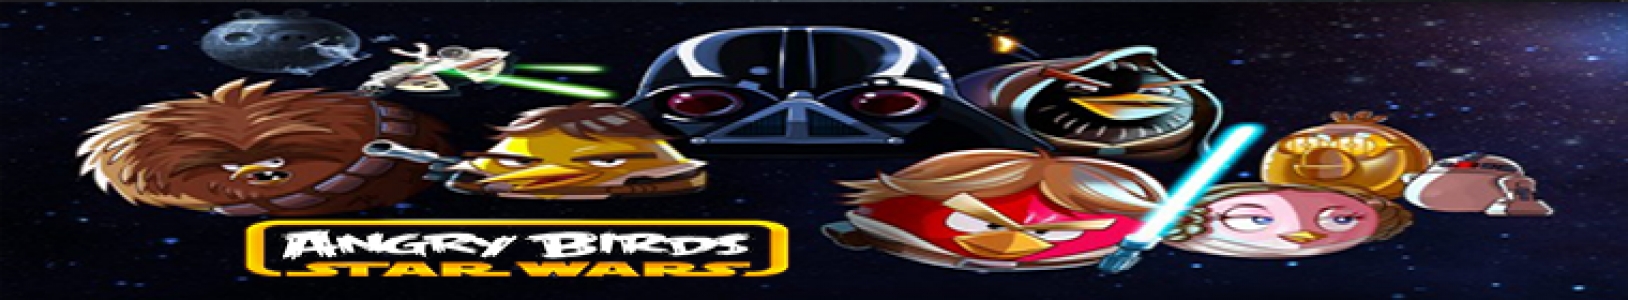 Angry Birds: Star Wars banner